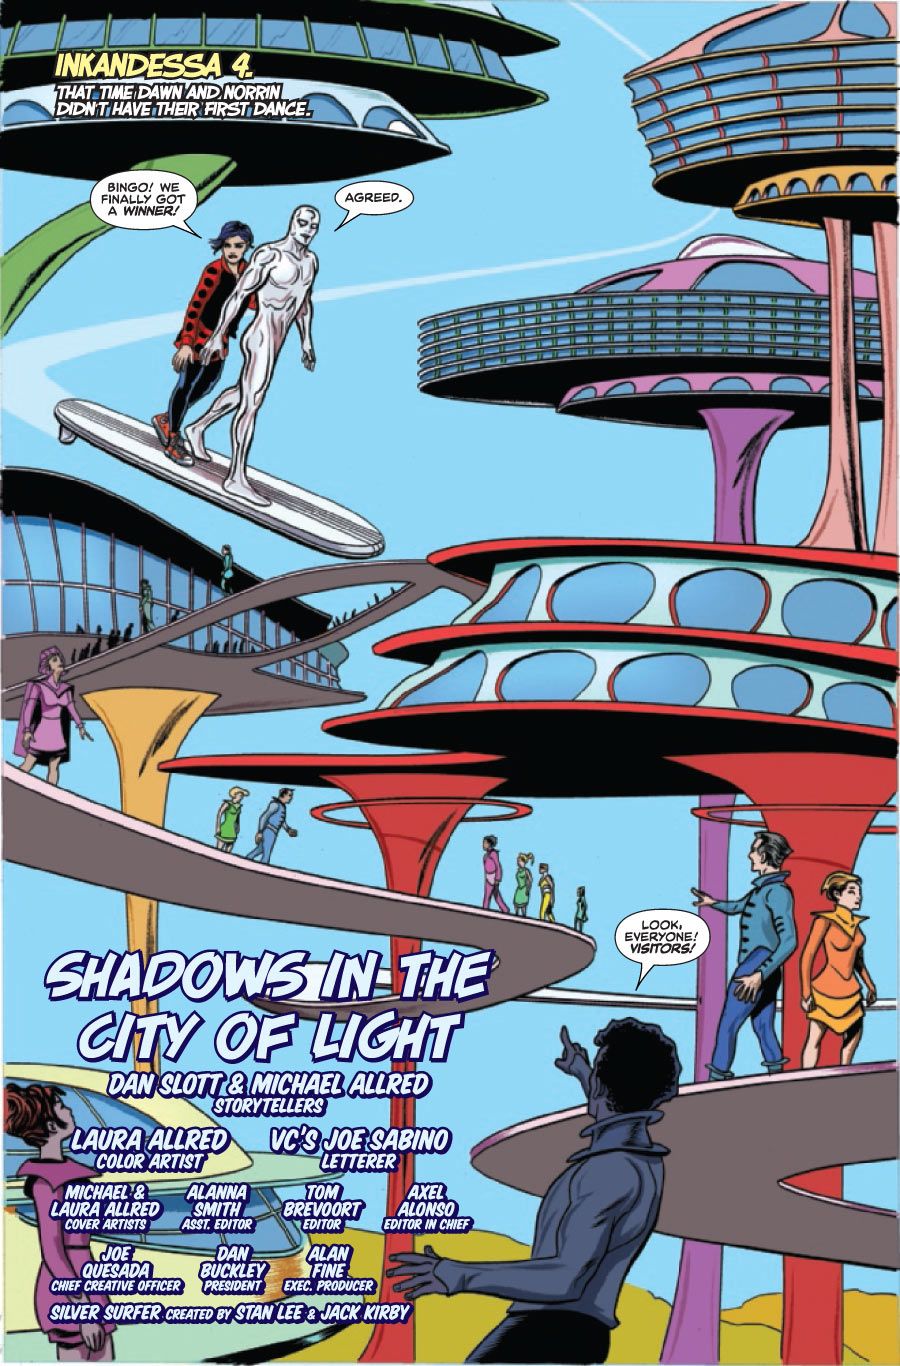 silver surfer 9 now